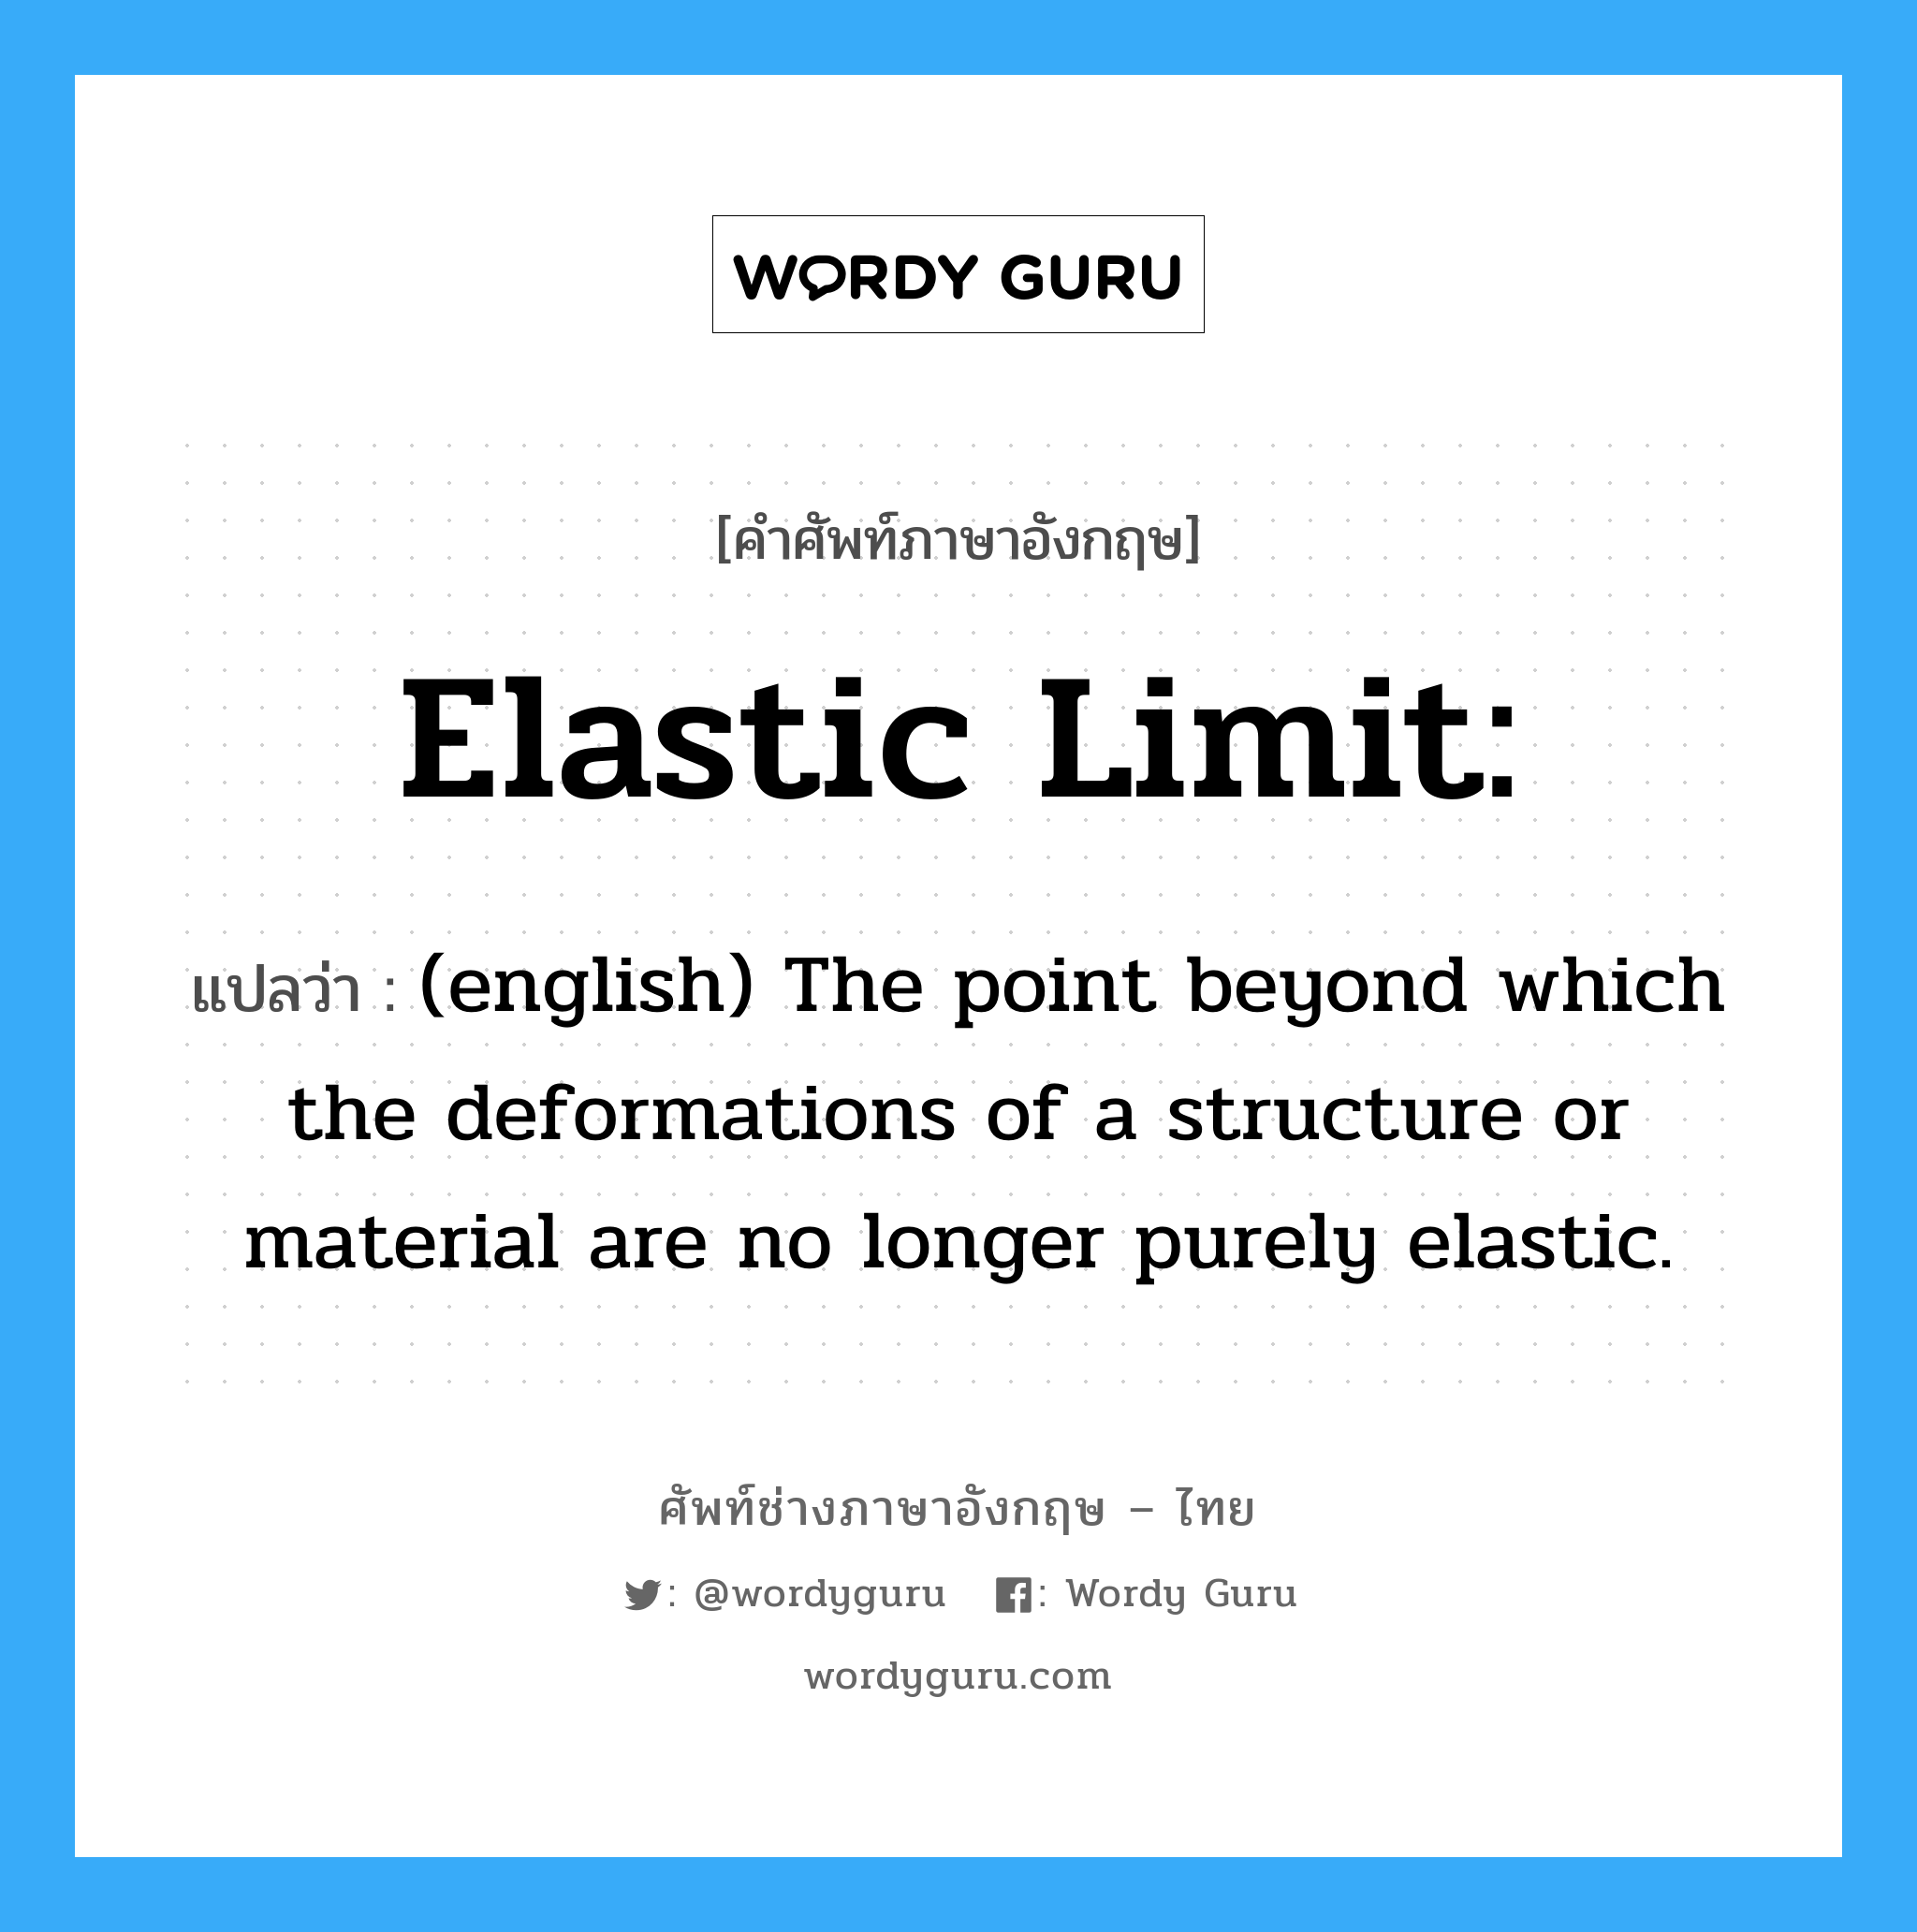 Elastic limit: แปลว่า?, คำศัพท์ช่างภาษาอังกฤษ - ไทย Elastic limit: คำศัพท์ภาษาอังกฤษ Elastic limit: แปลว่า (english) The point beyond which the deformations of a structure or material are no longer purely elastic.